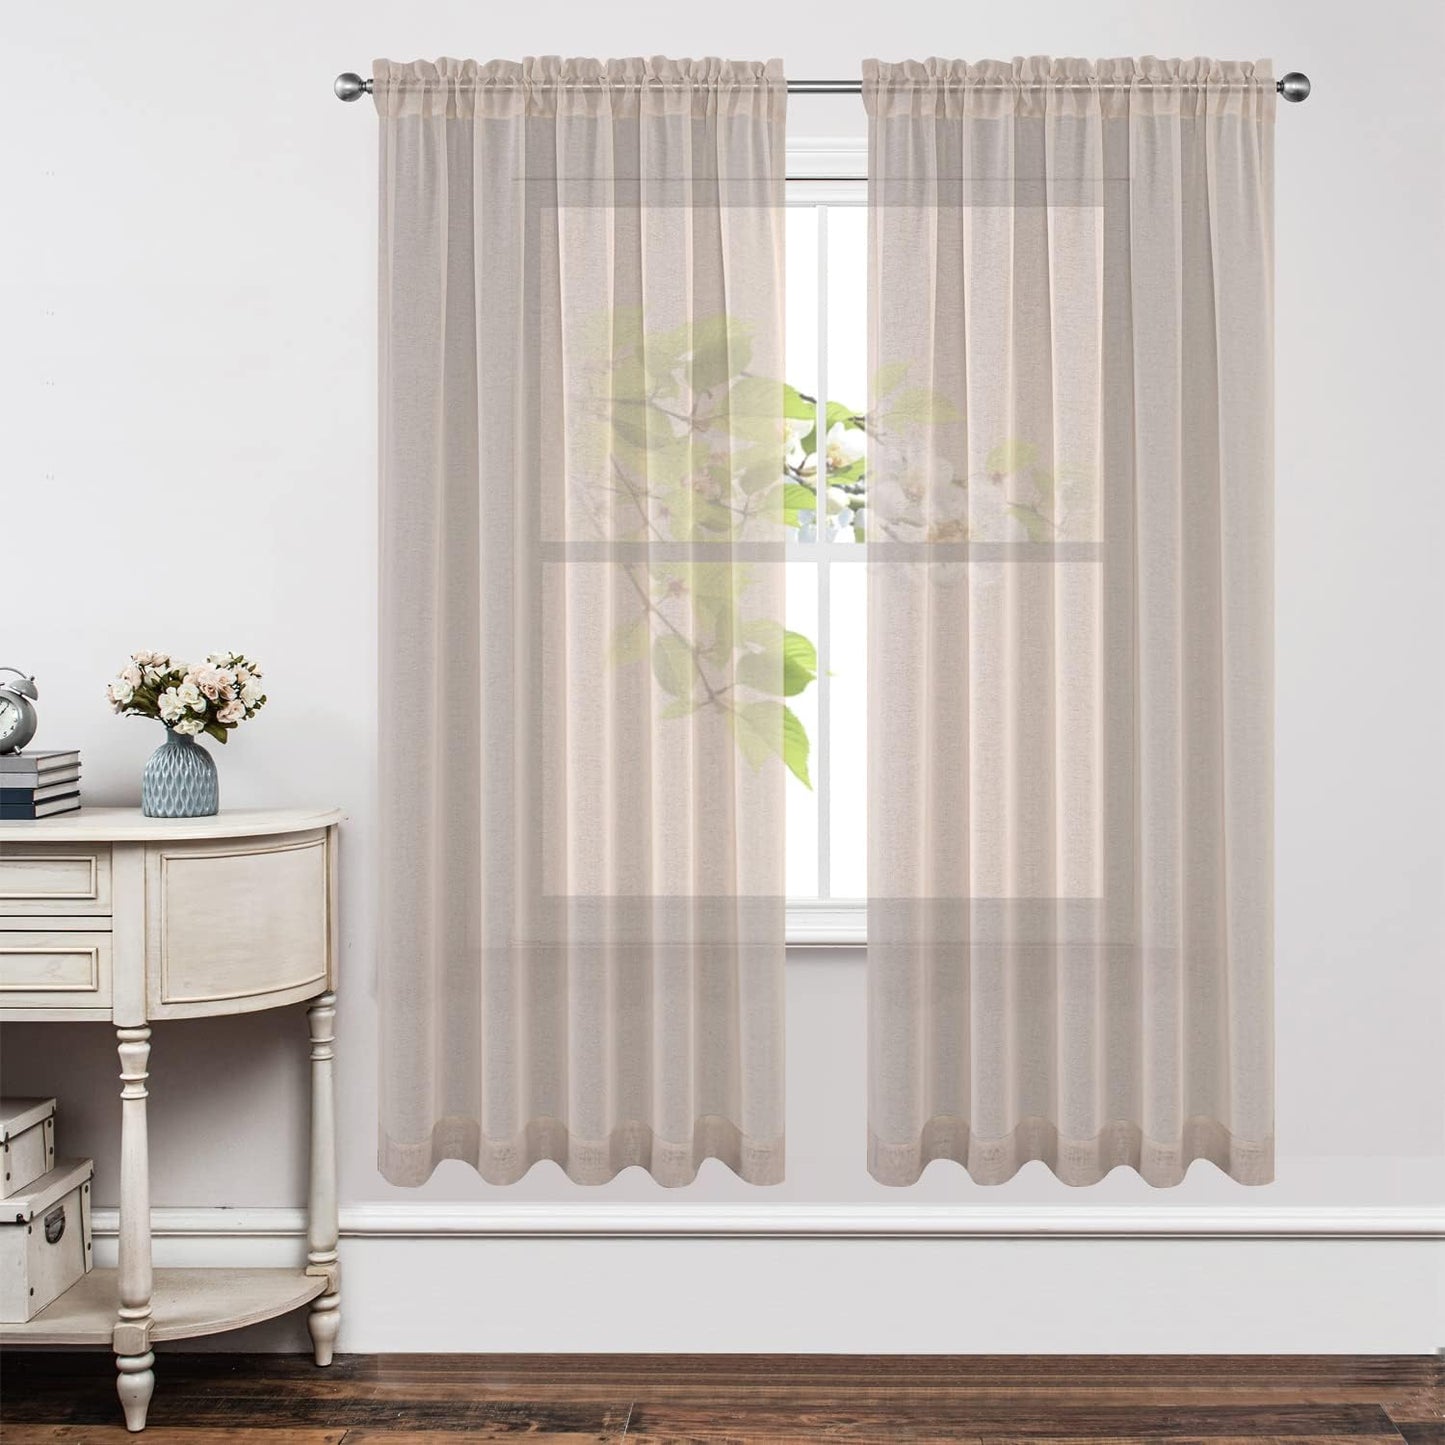 Joydeco White Sheer Curtains 63 Inch Length 2 Panels Set, Rod Pocket Long Sheer Curtains for Window Bedroom Living Room, Lightweight Semi Drape Panels for Yard Patio (54X63 Inch, off White)  Joydeco Linen 54W X 72L Inch X 2 Panels 